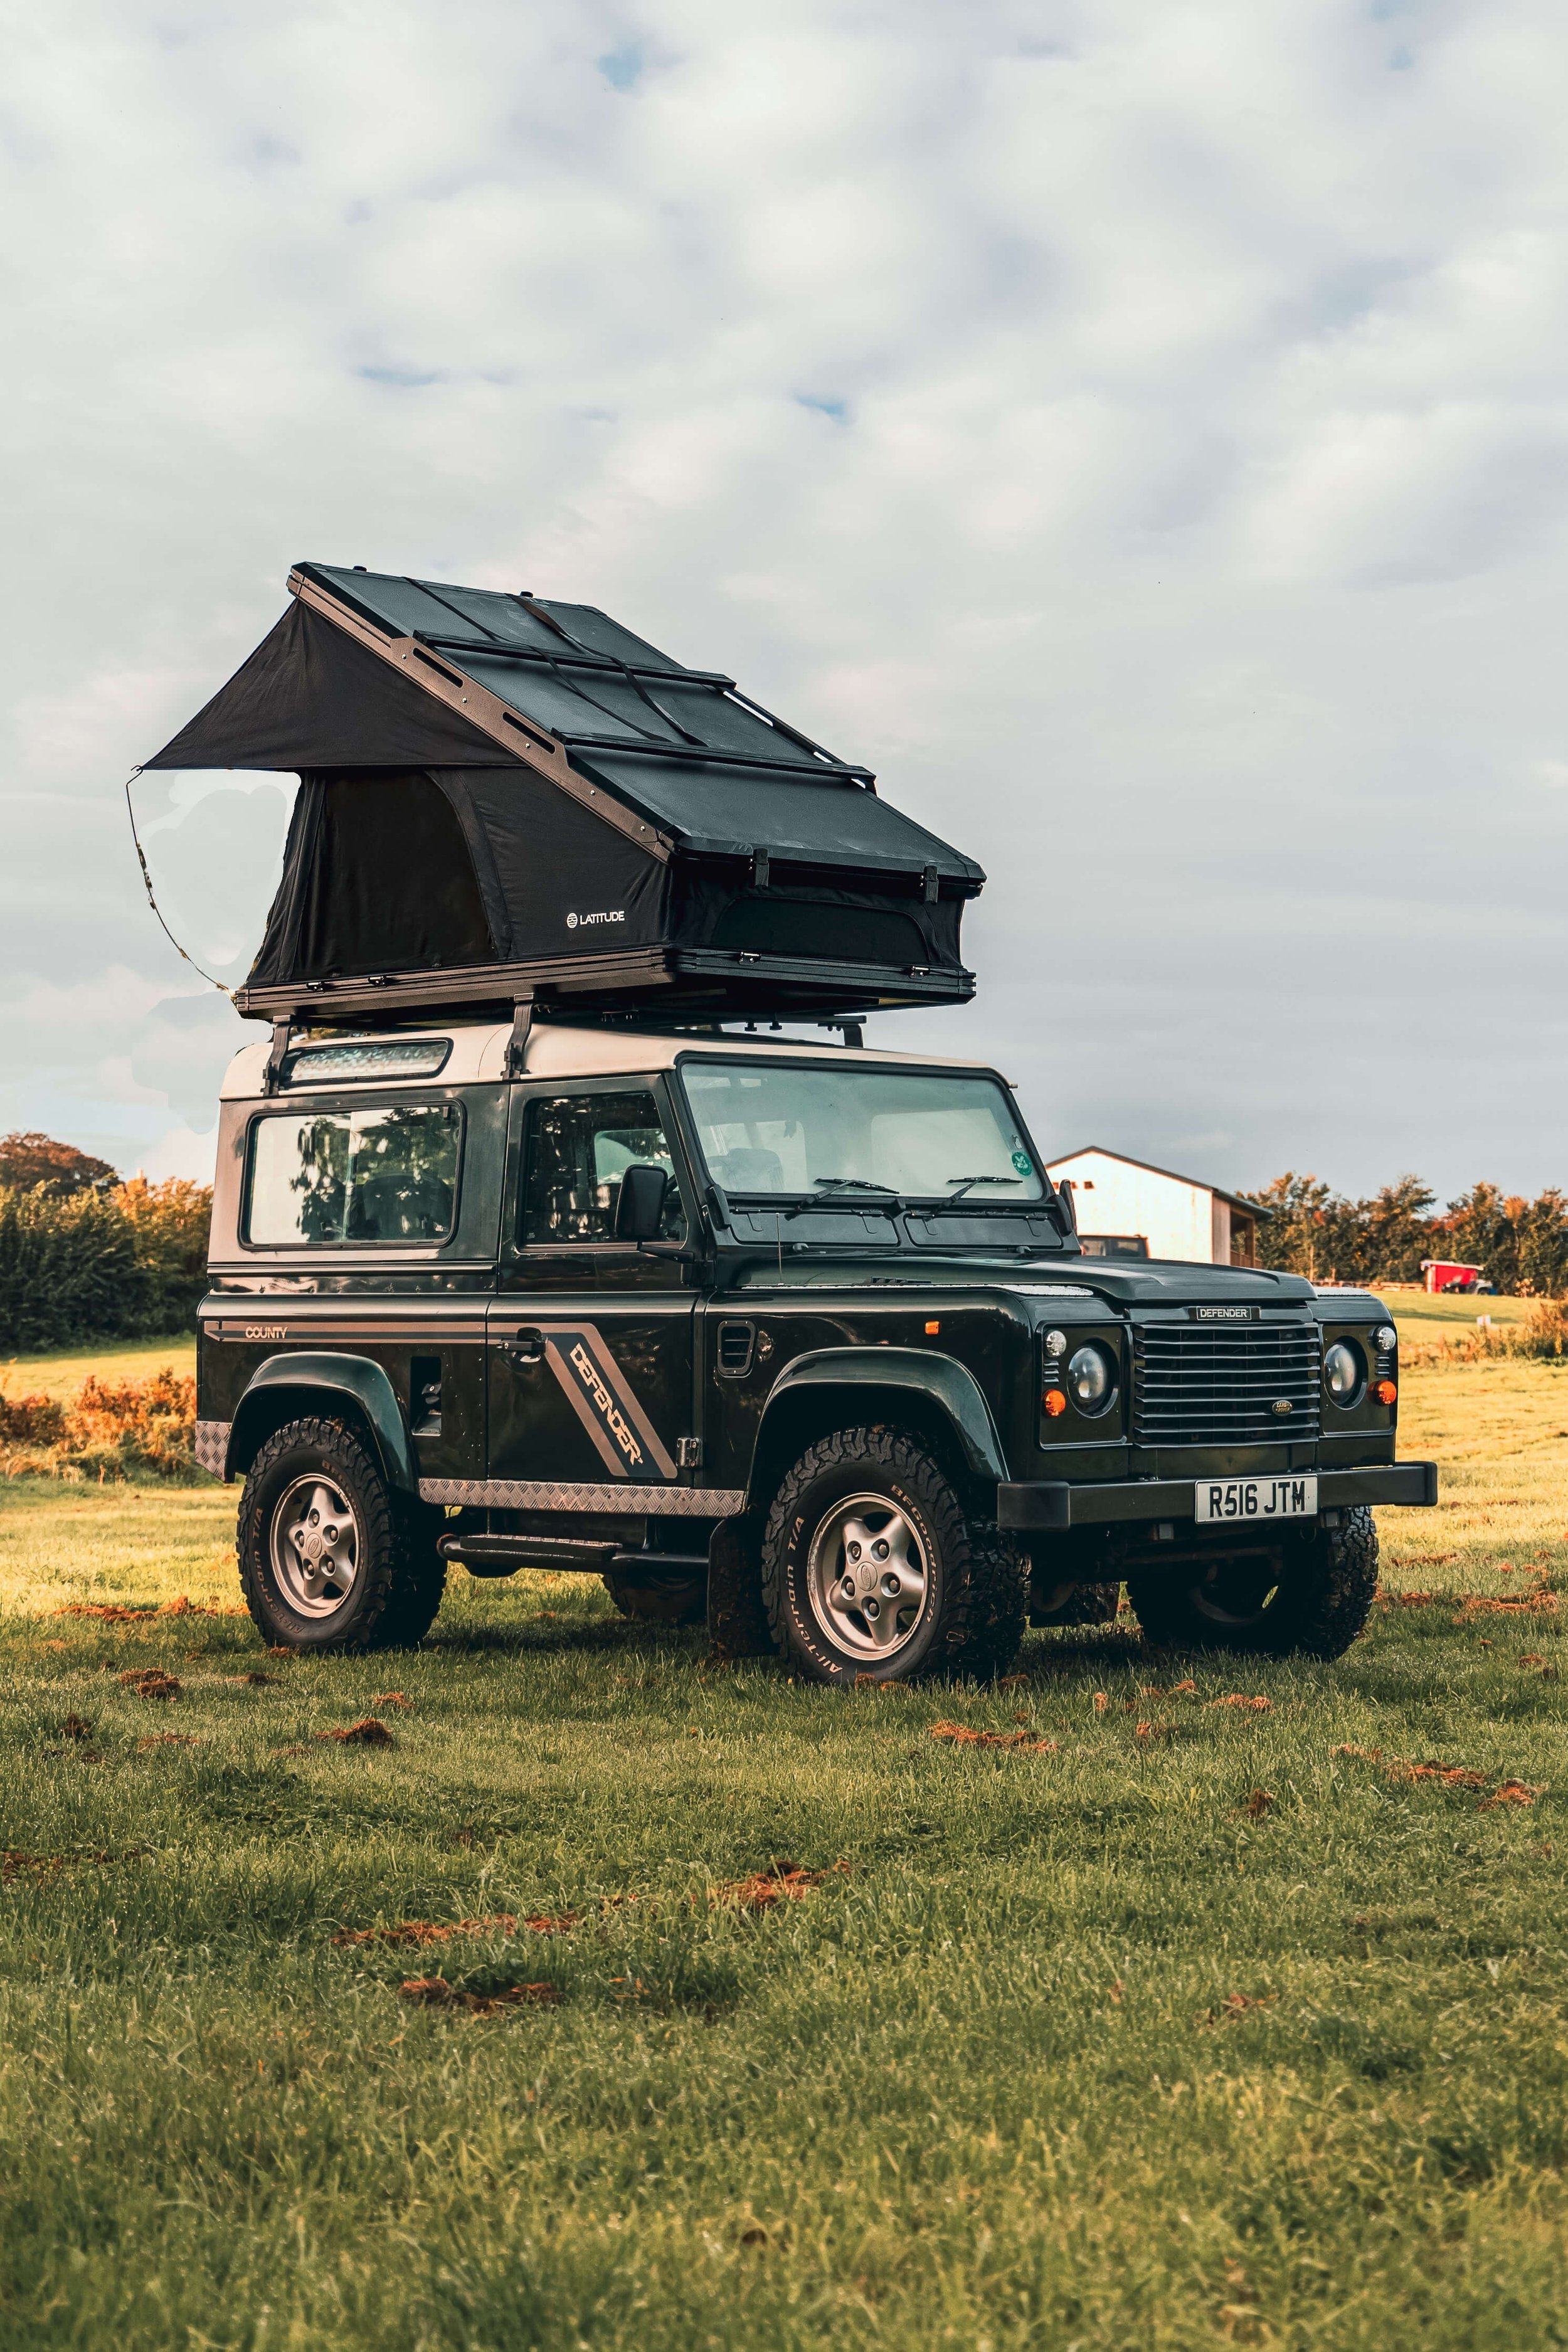 Roof tent on a land rover